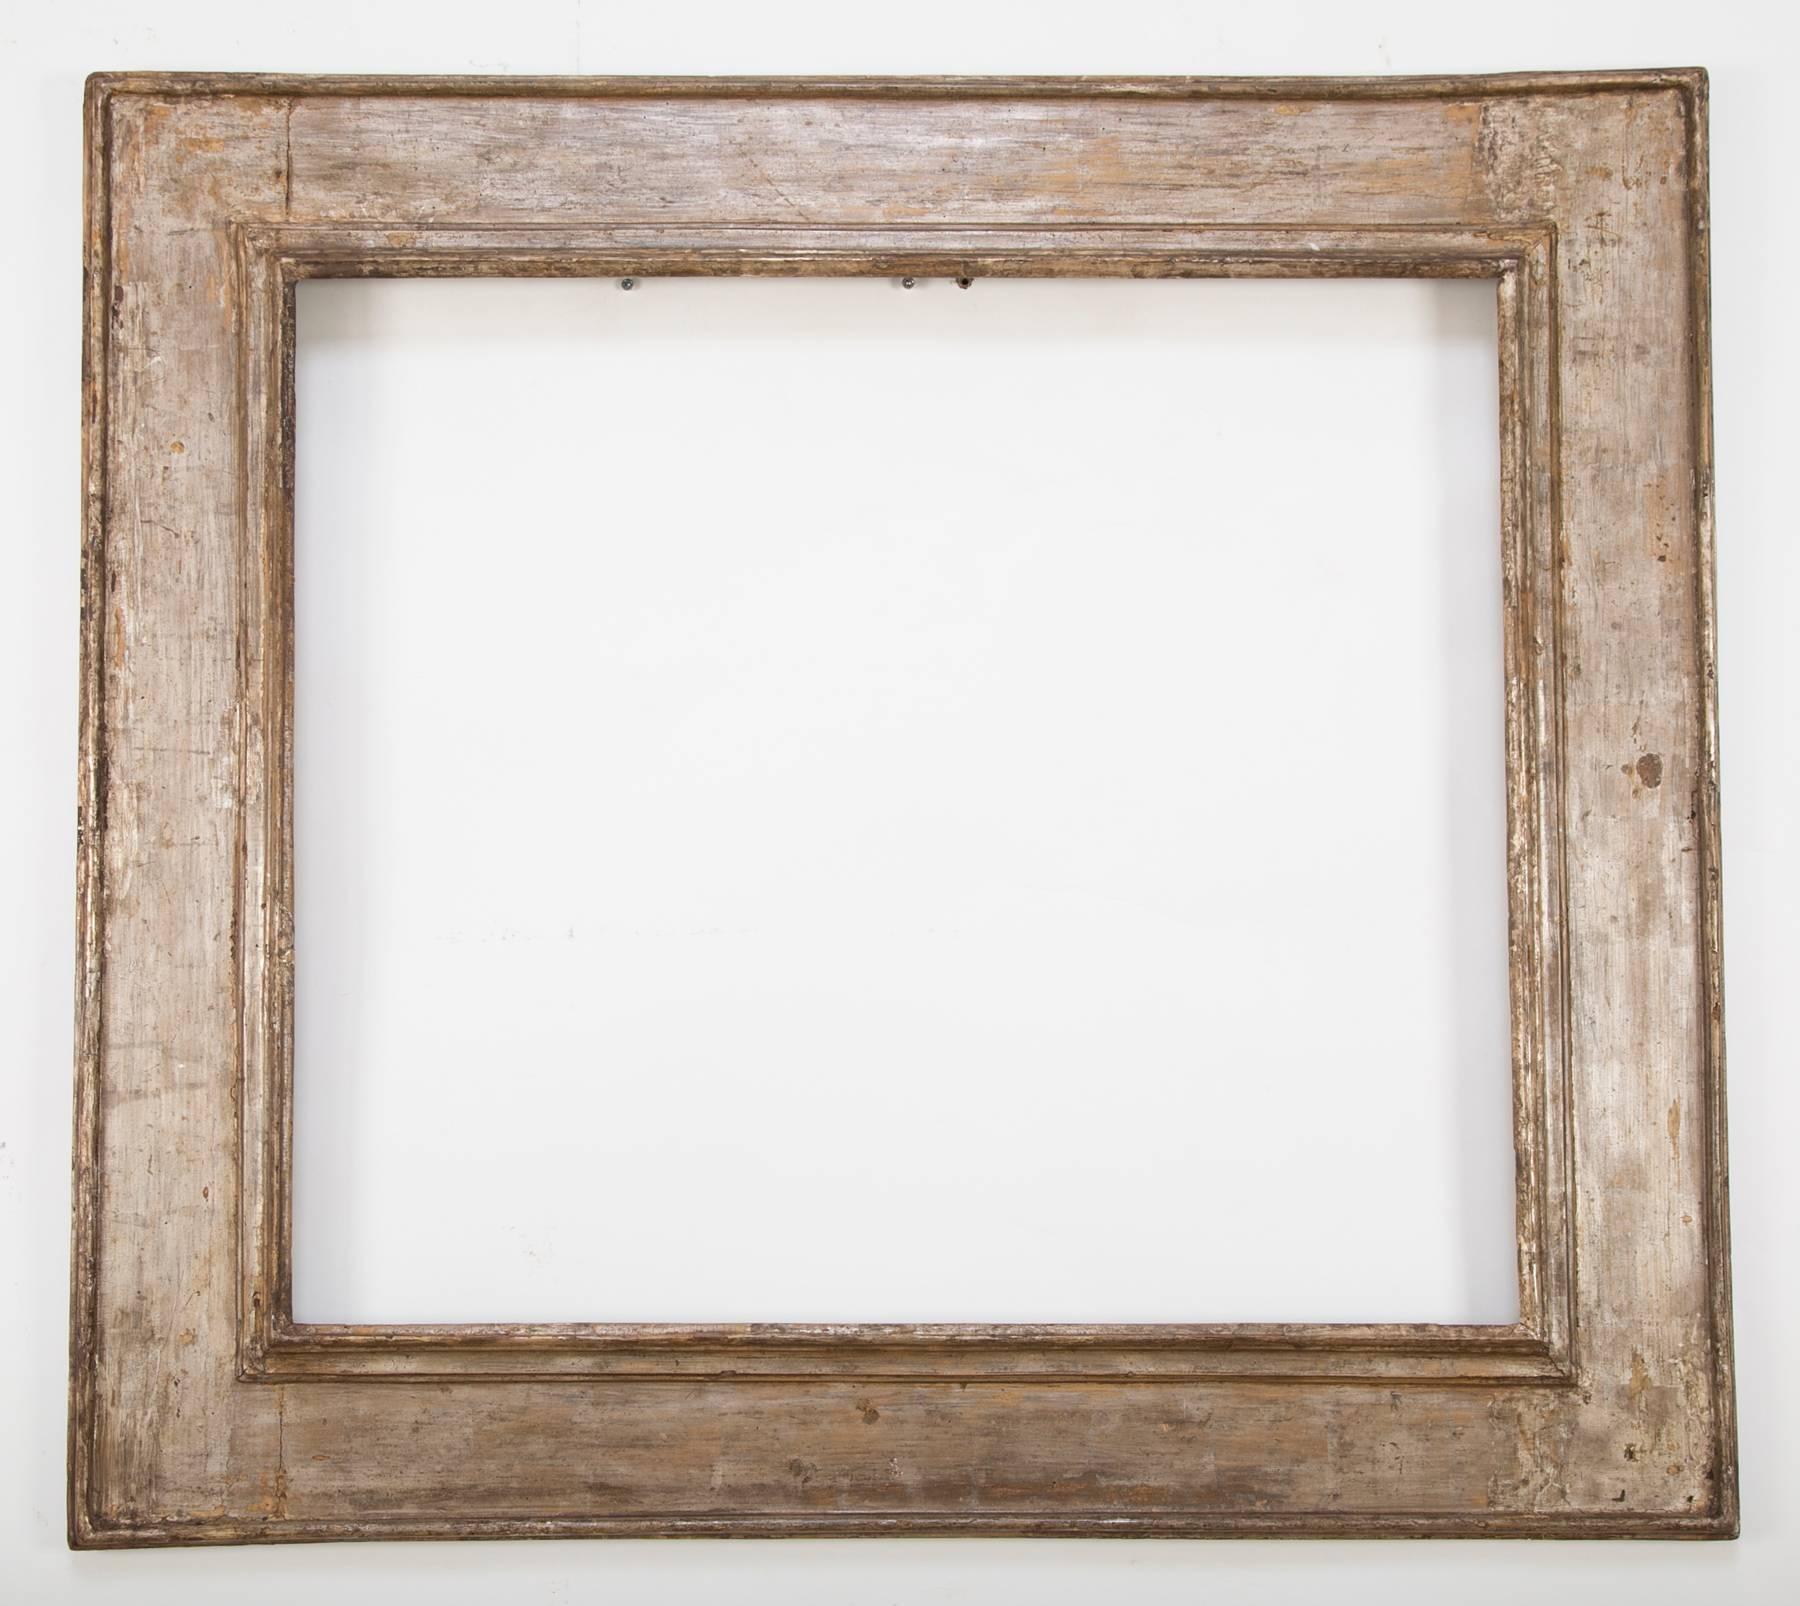 An Italian Baroque period frame, originally made for an Old Master painting, now holding a beveled glass mirror. The wide Roman molding and original silver gilding give the frame a contemporary feel. Great for both an antique and modern